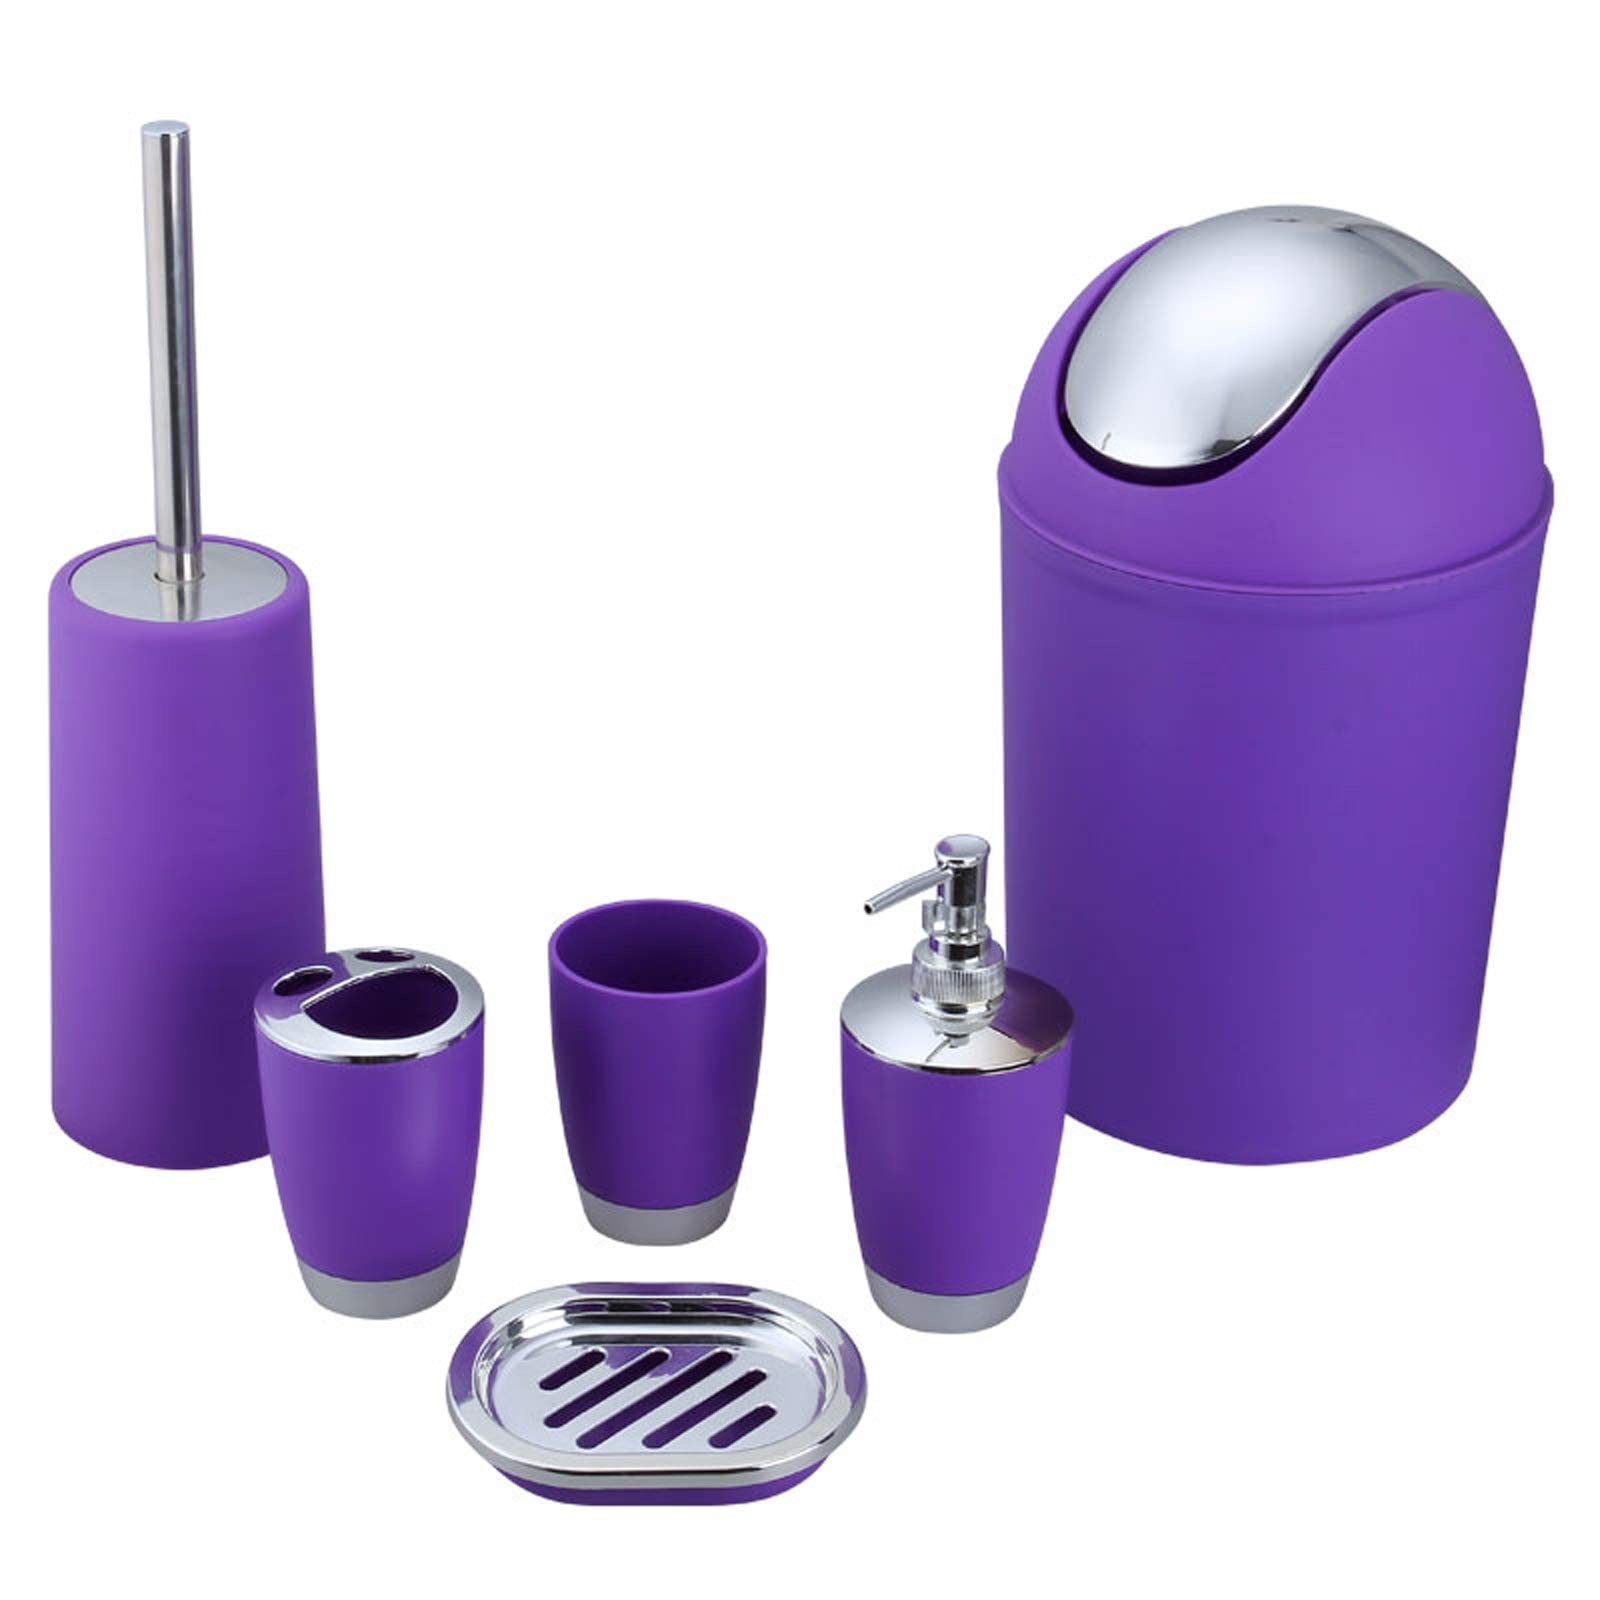 Book Cover Bathroom Accessories Set 6 Pieces Plastic Bathroom Accessories Toothbrush Holder, Rinse Cup, Soap Dish, Hand Sanitizer Bottle, Waste Bin, Toilet Brush with Holder (Purple)